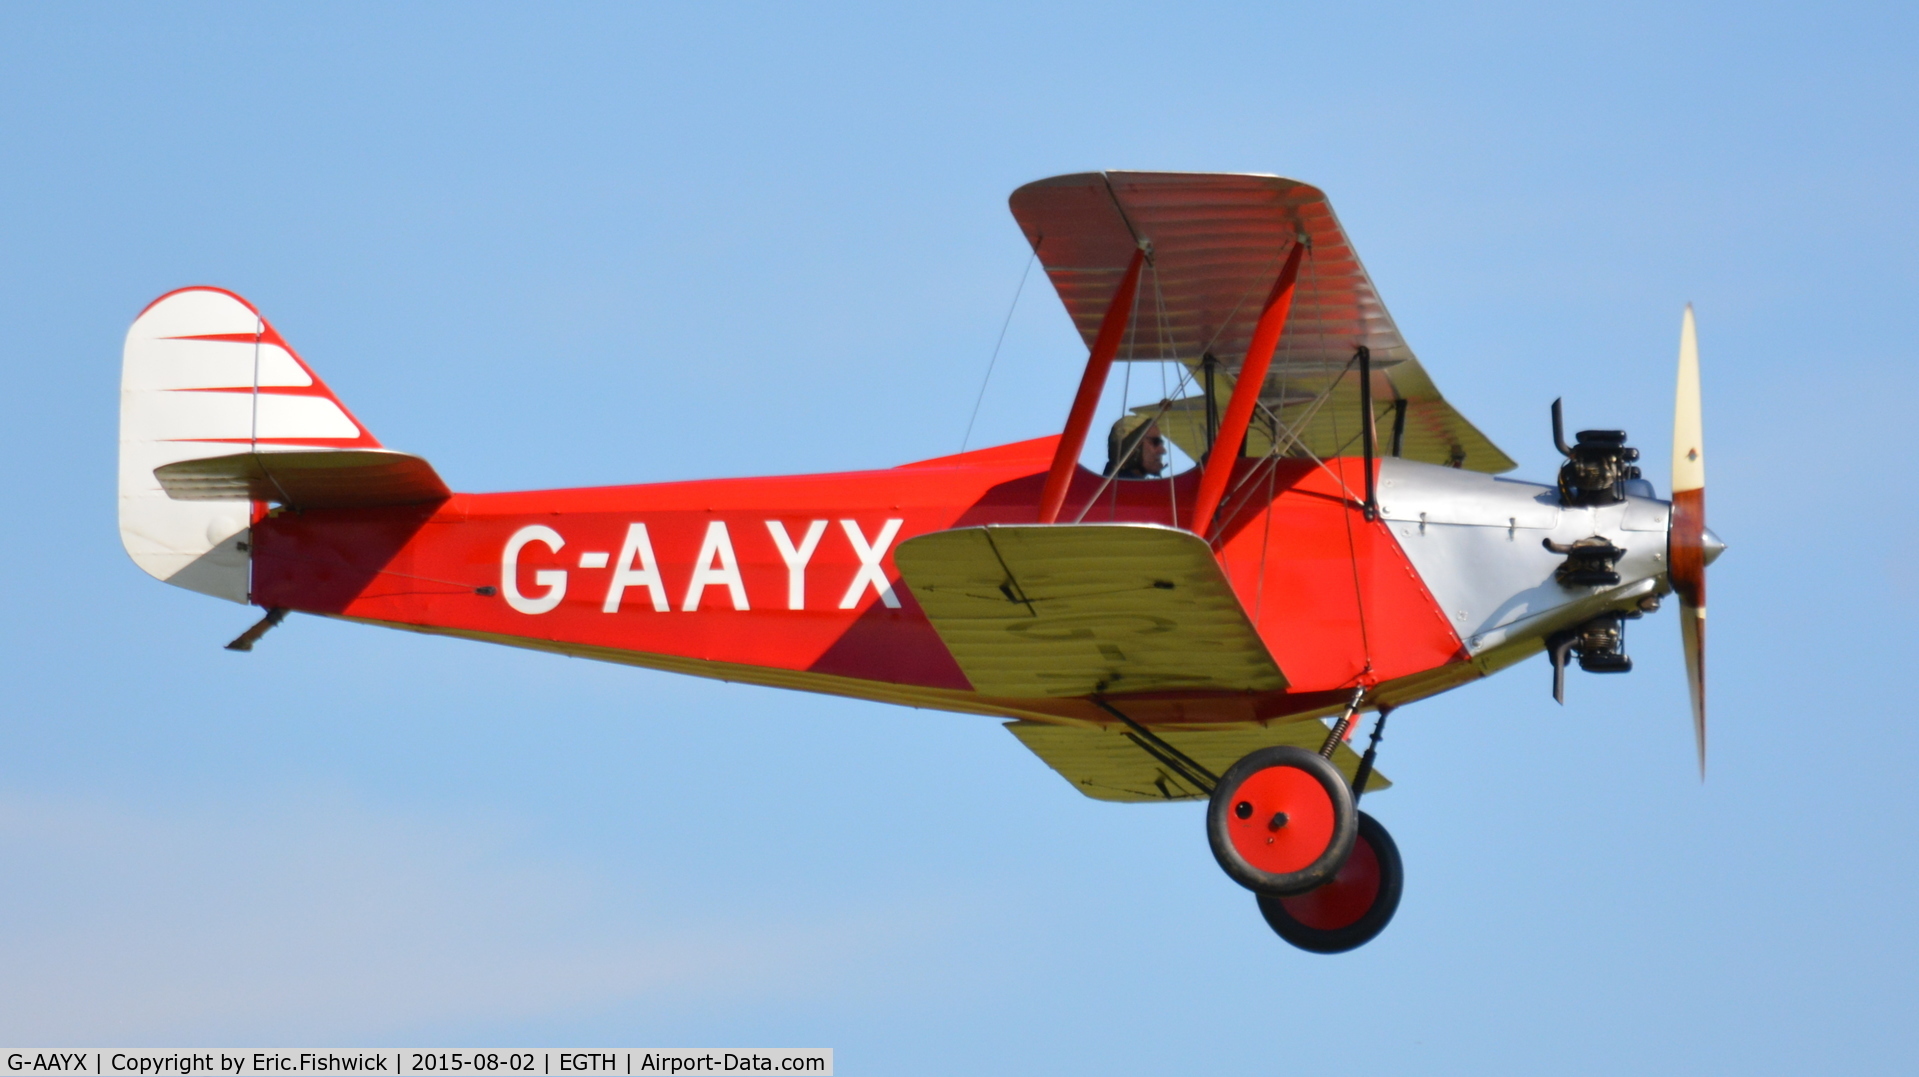 G-AAYX, 1930 Southern Martlet C/N 202, 42. G-AAYX leading the Mock Air Race at the Shuttleworth Wings and Wheels Airshow, Aug. 2015.